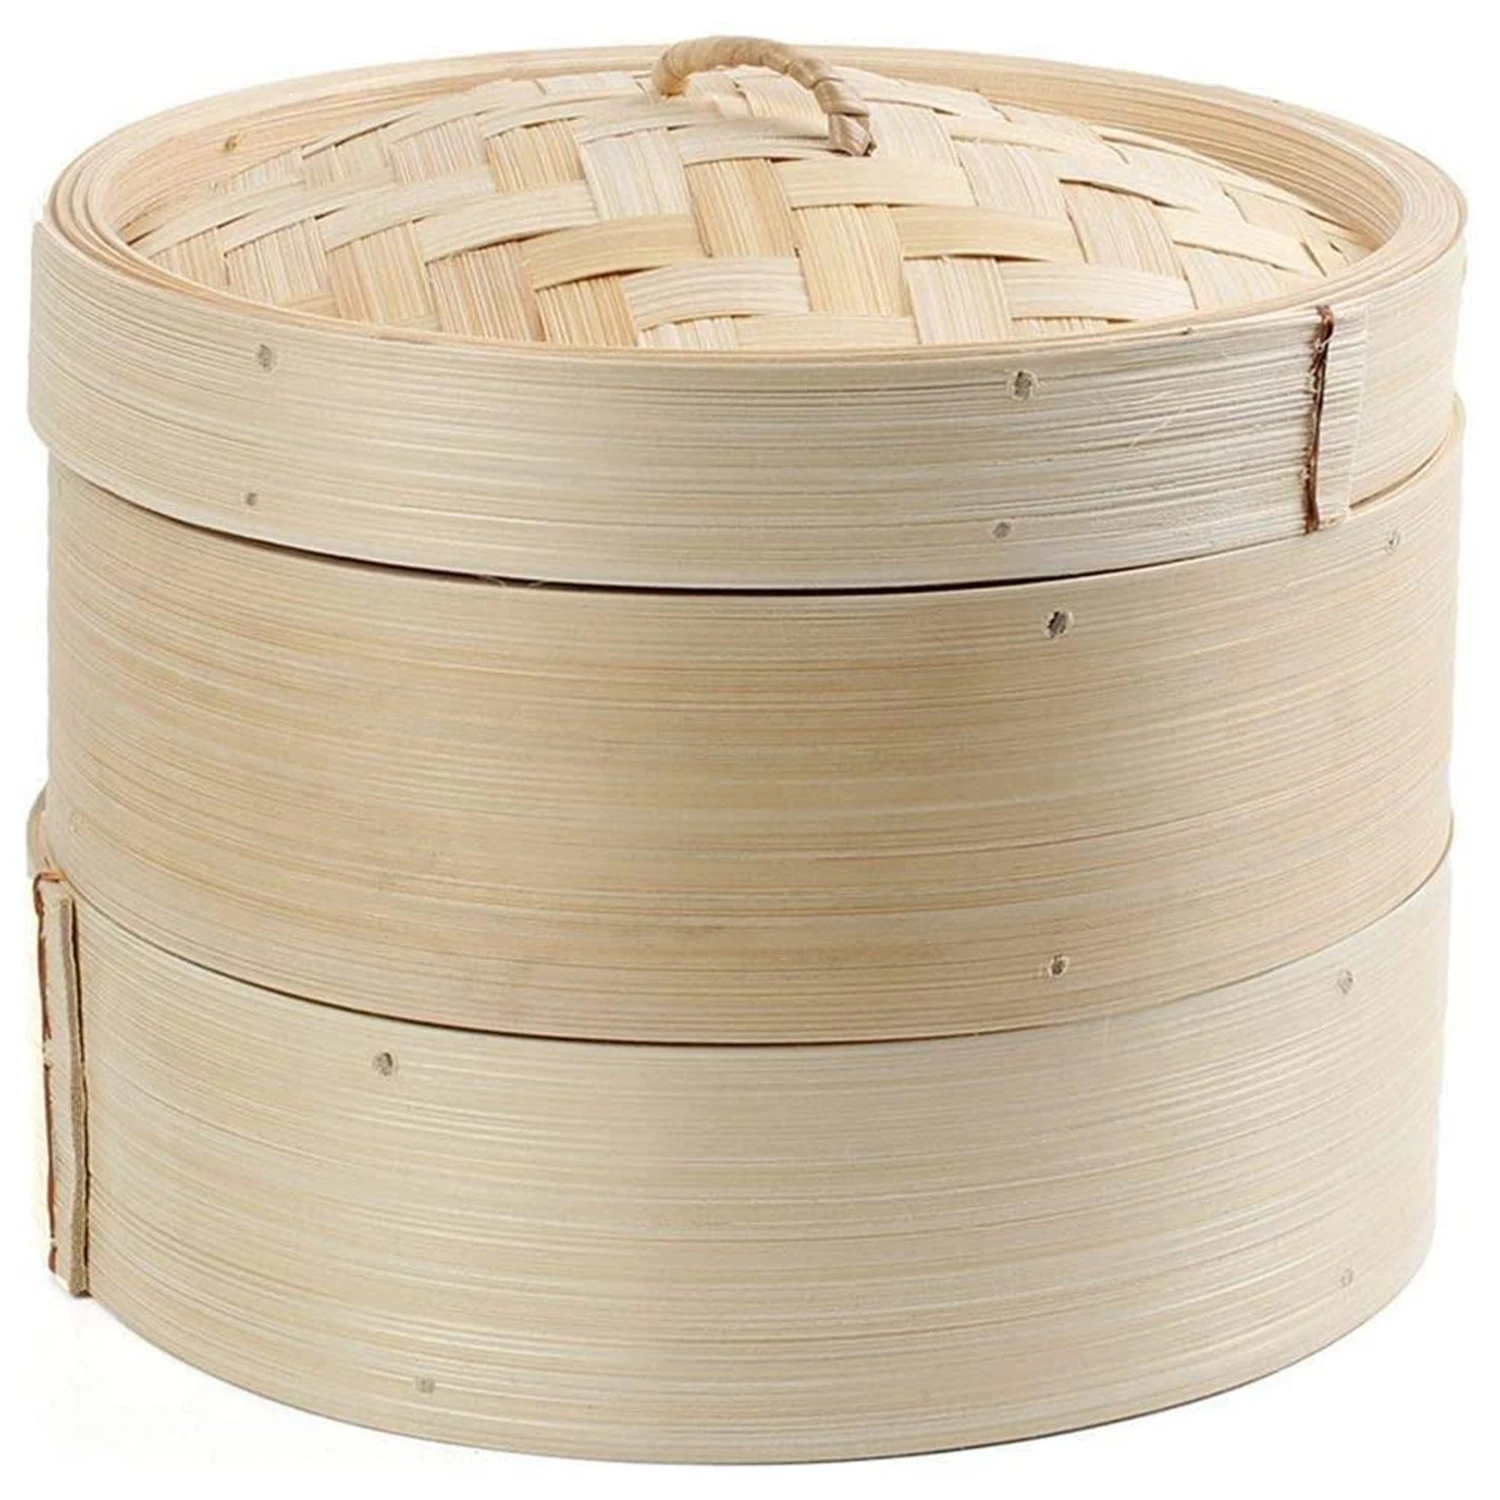 

Bamboo Steamer 2 Tier 8 Inch Dim Sum Basket Rice Pasta Cooker Set with Lid By Steam Basket for Vegetables